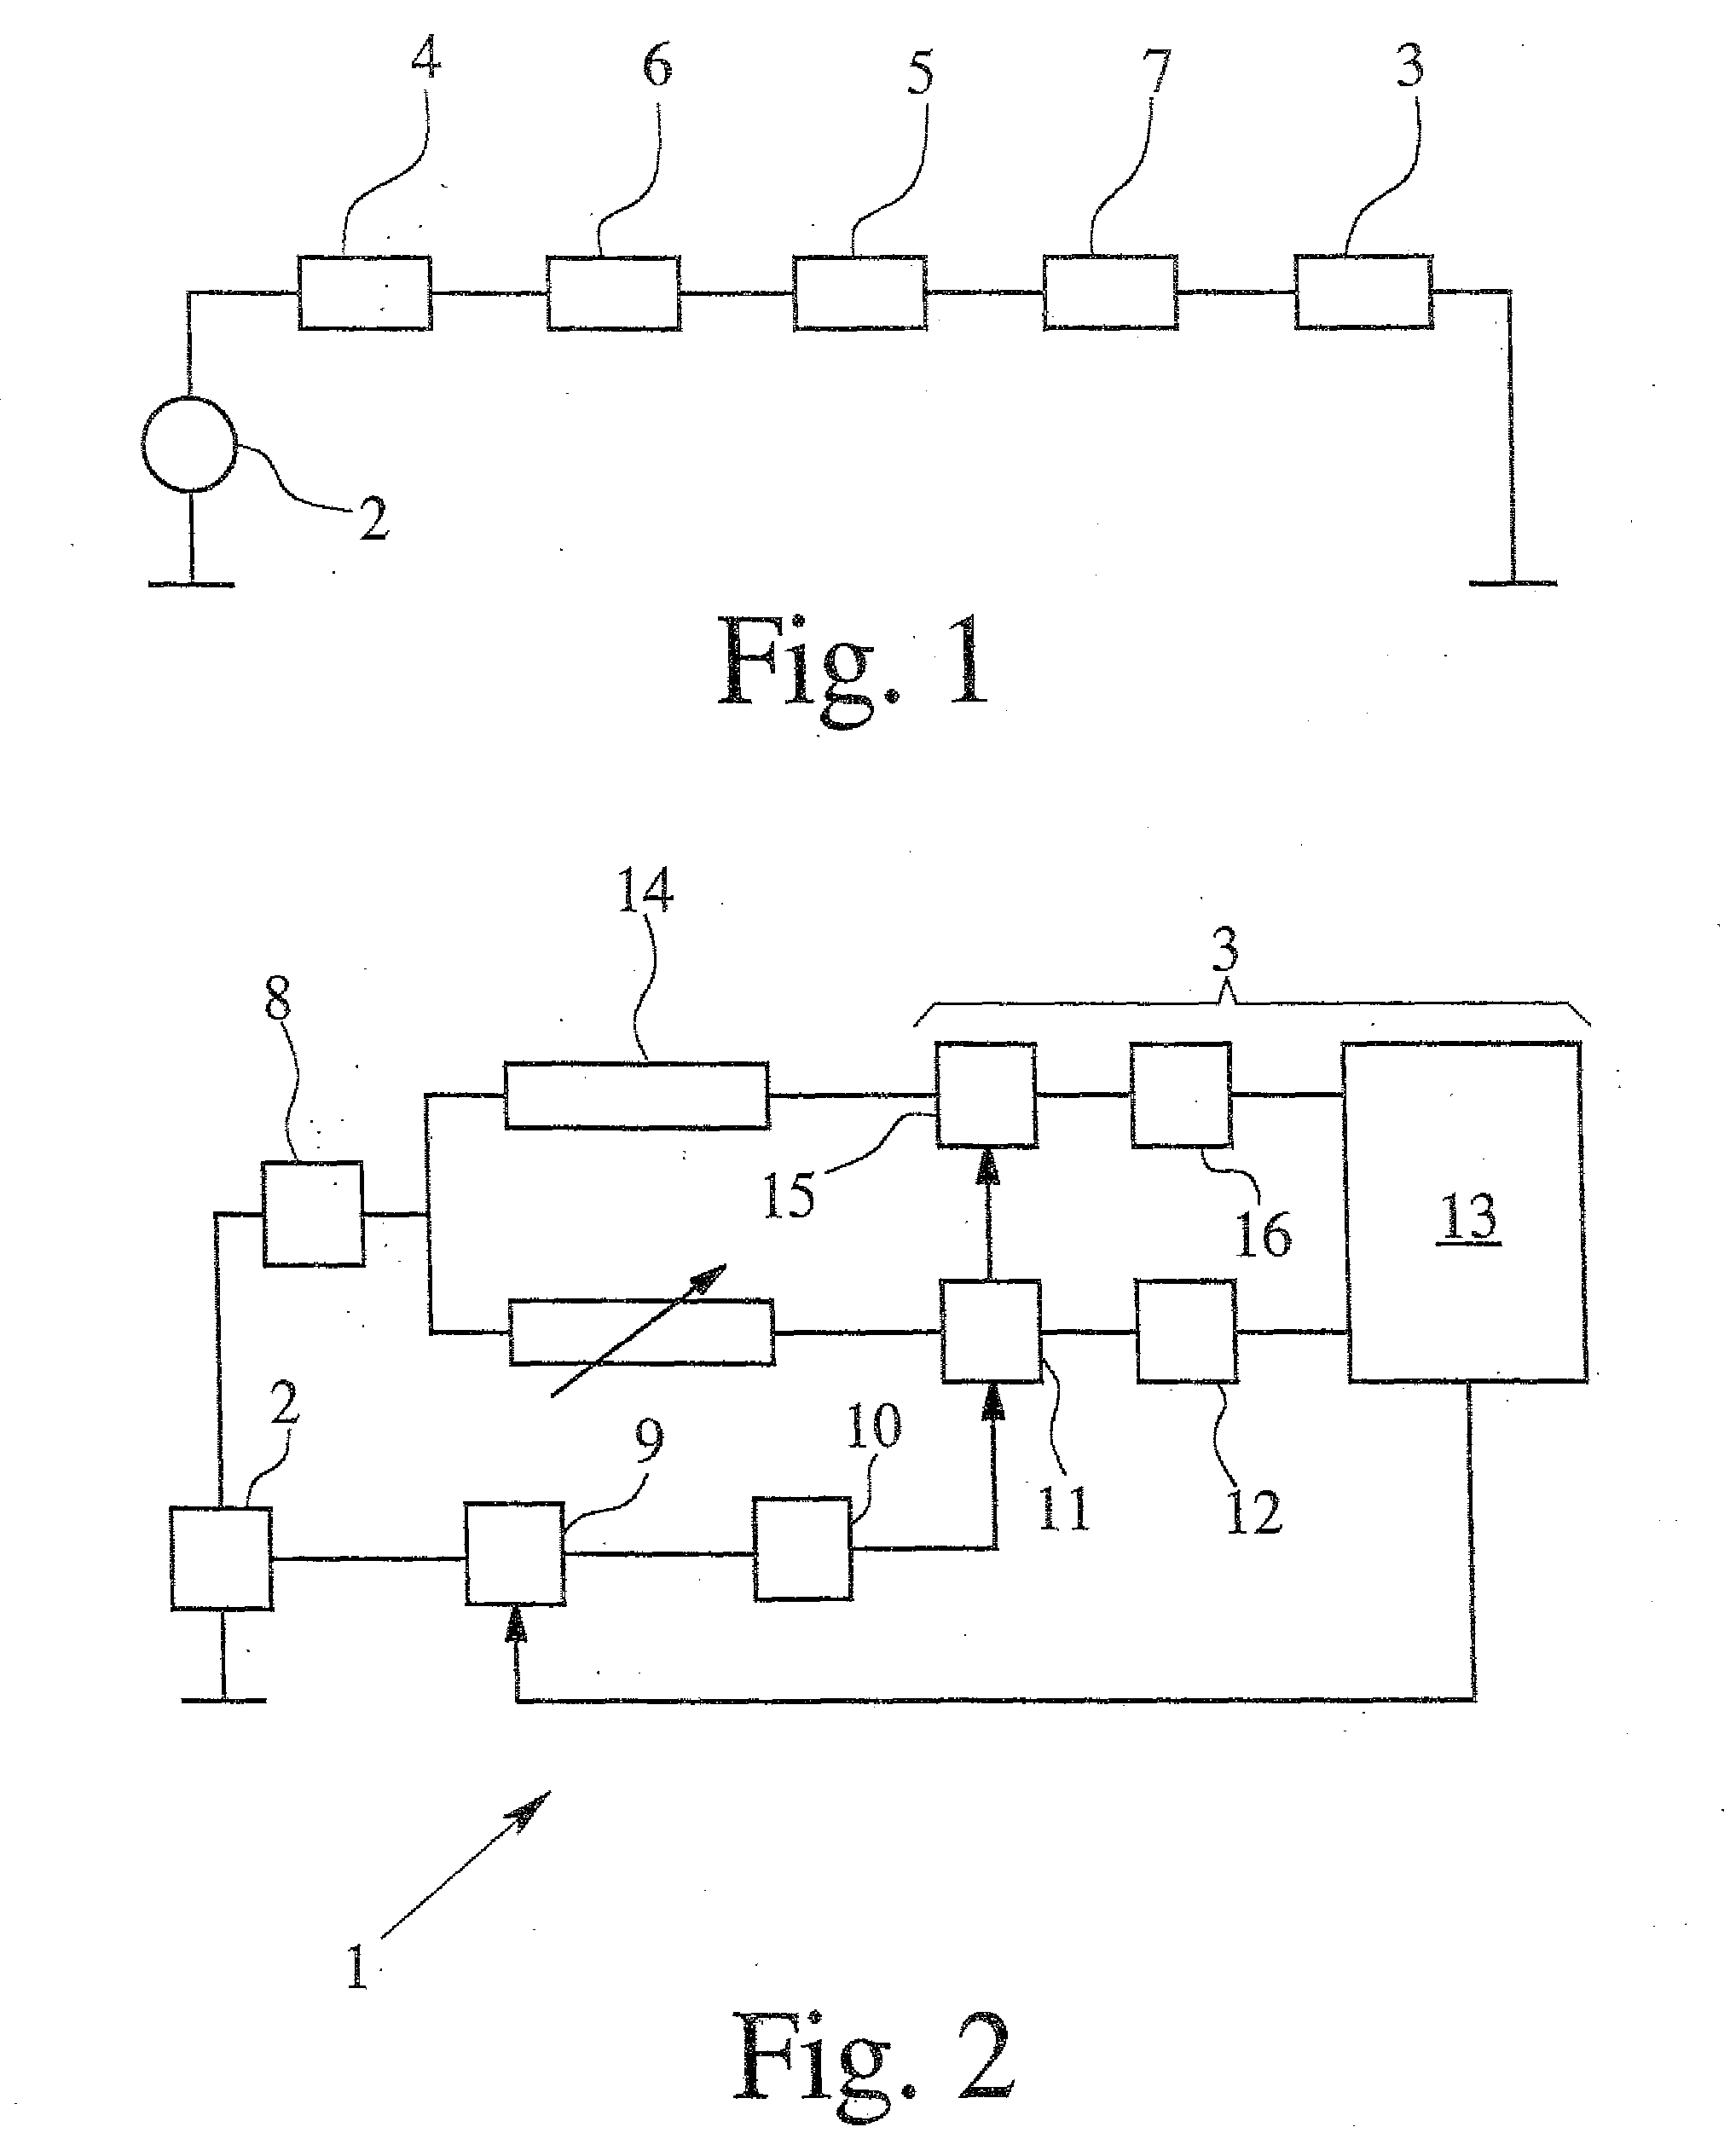 Capacitive level measurement and detection device